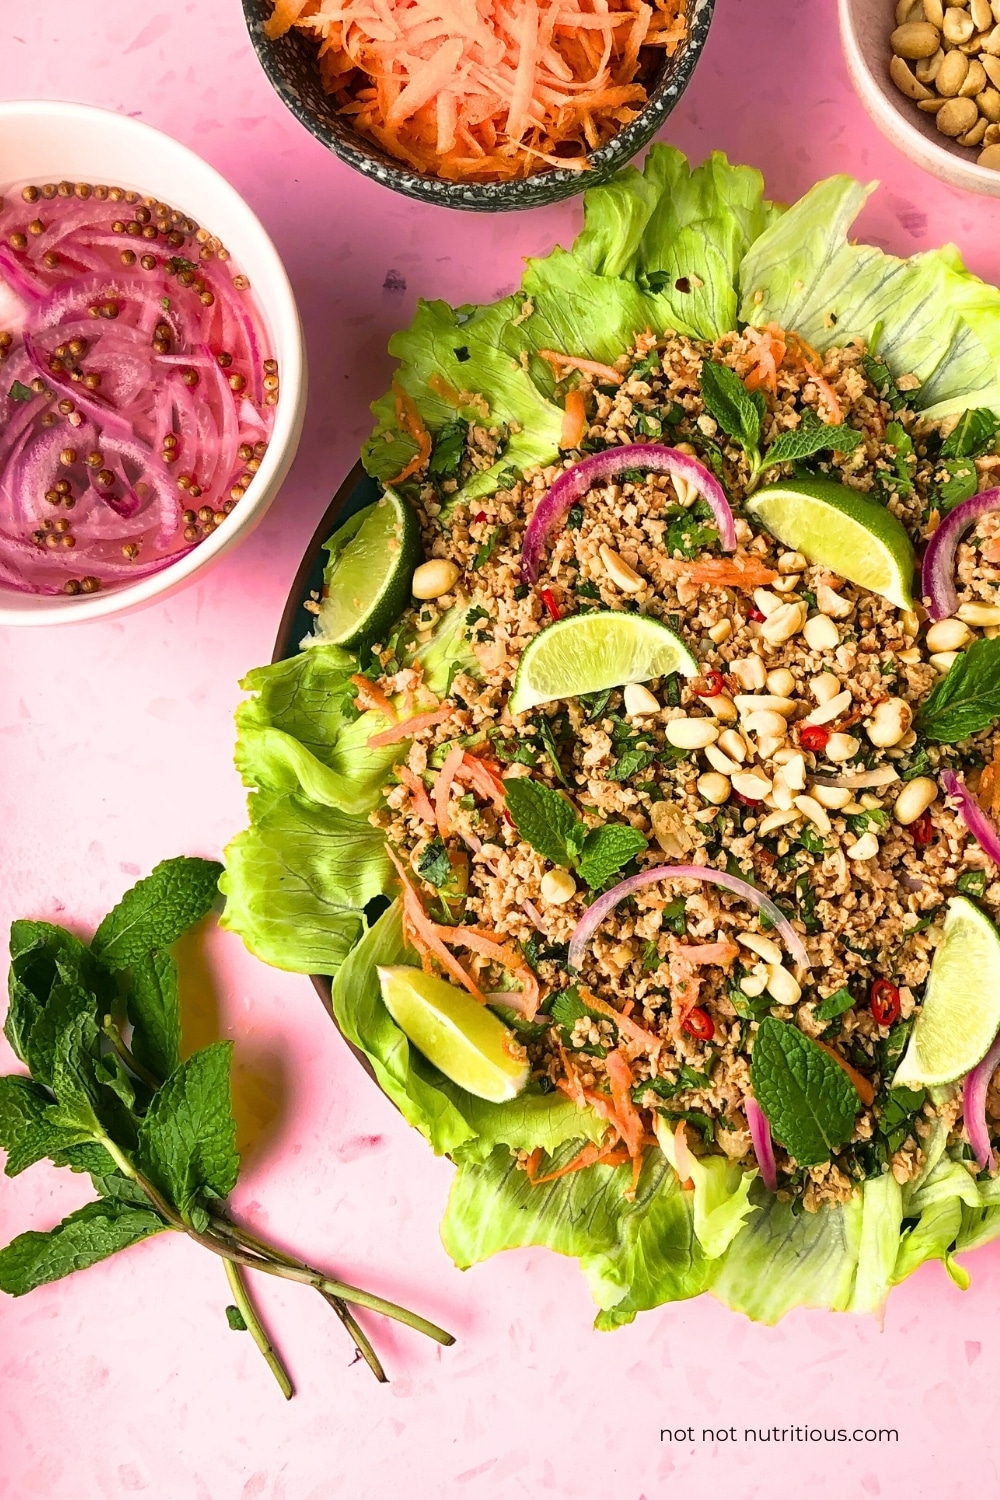 Thai-Inspired Vegan Larb, over lettuce, garnished with limes, mint, pickled shallots